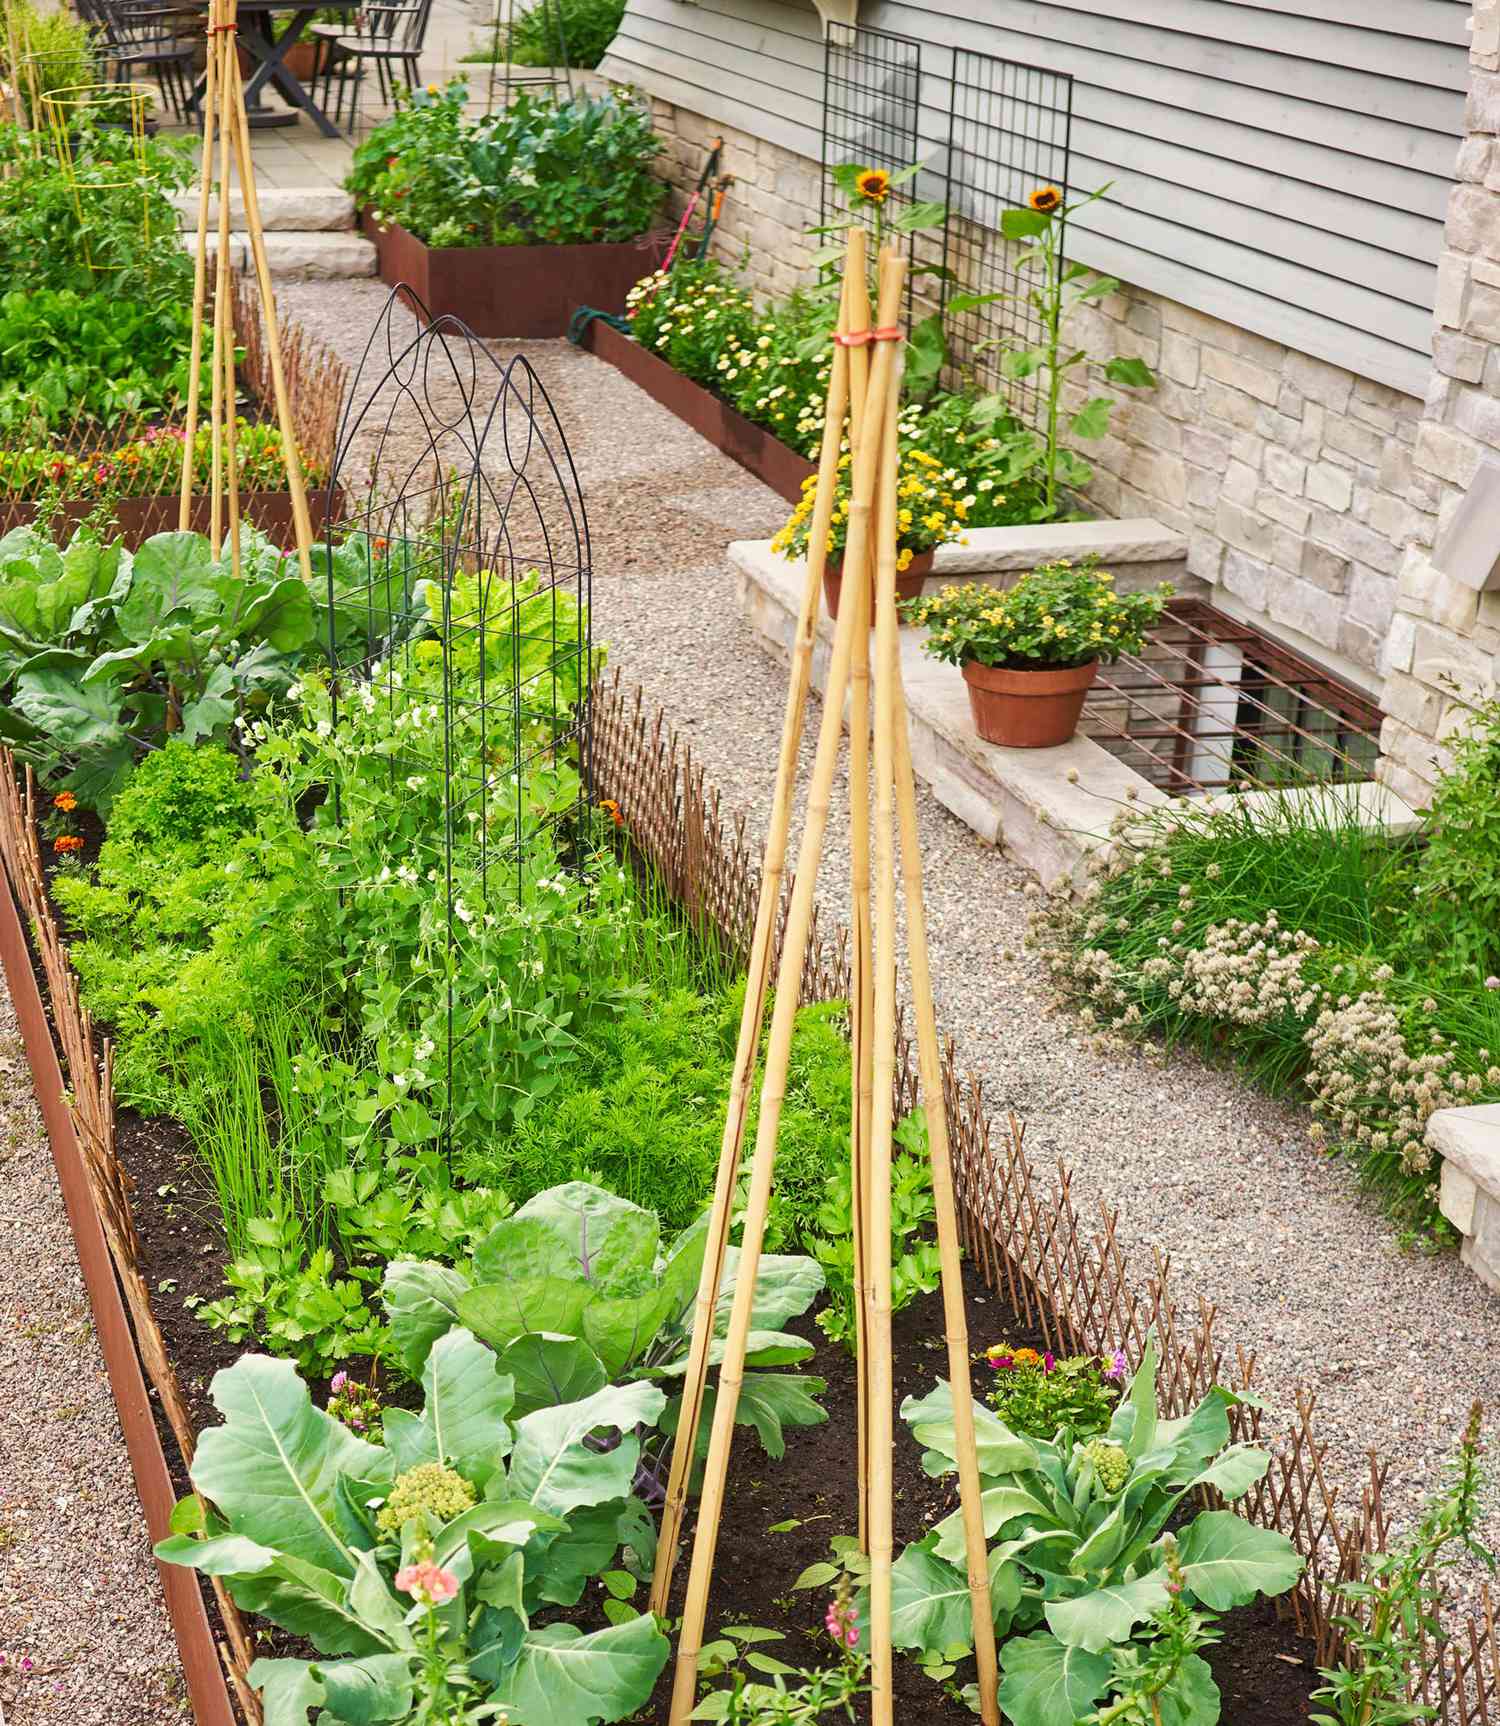 How To Make a Raised Bed Garden